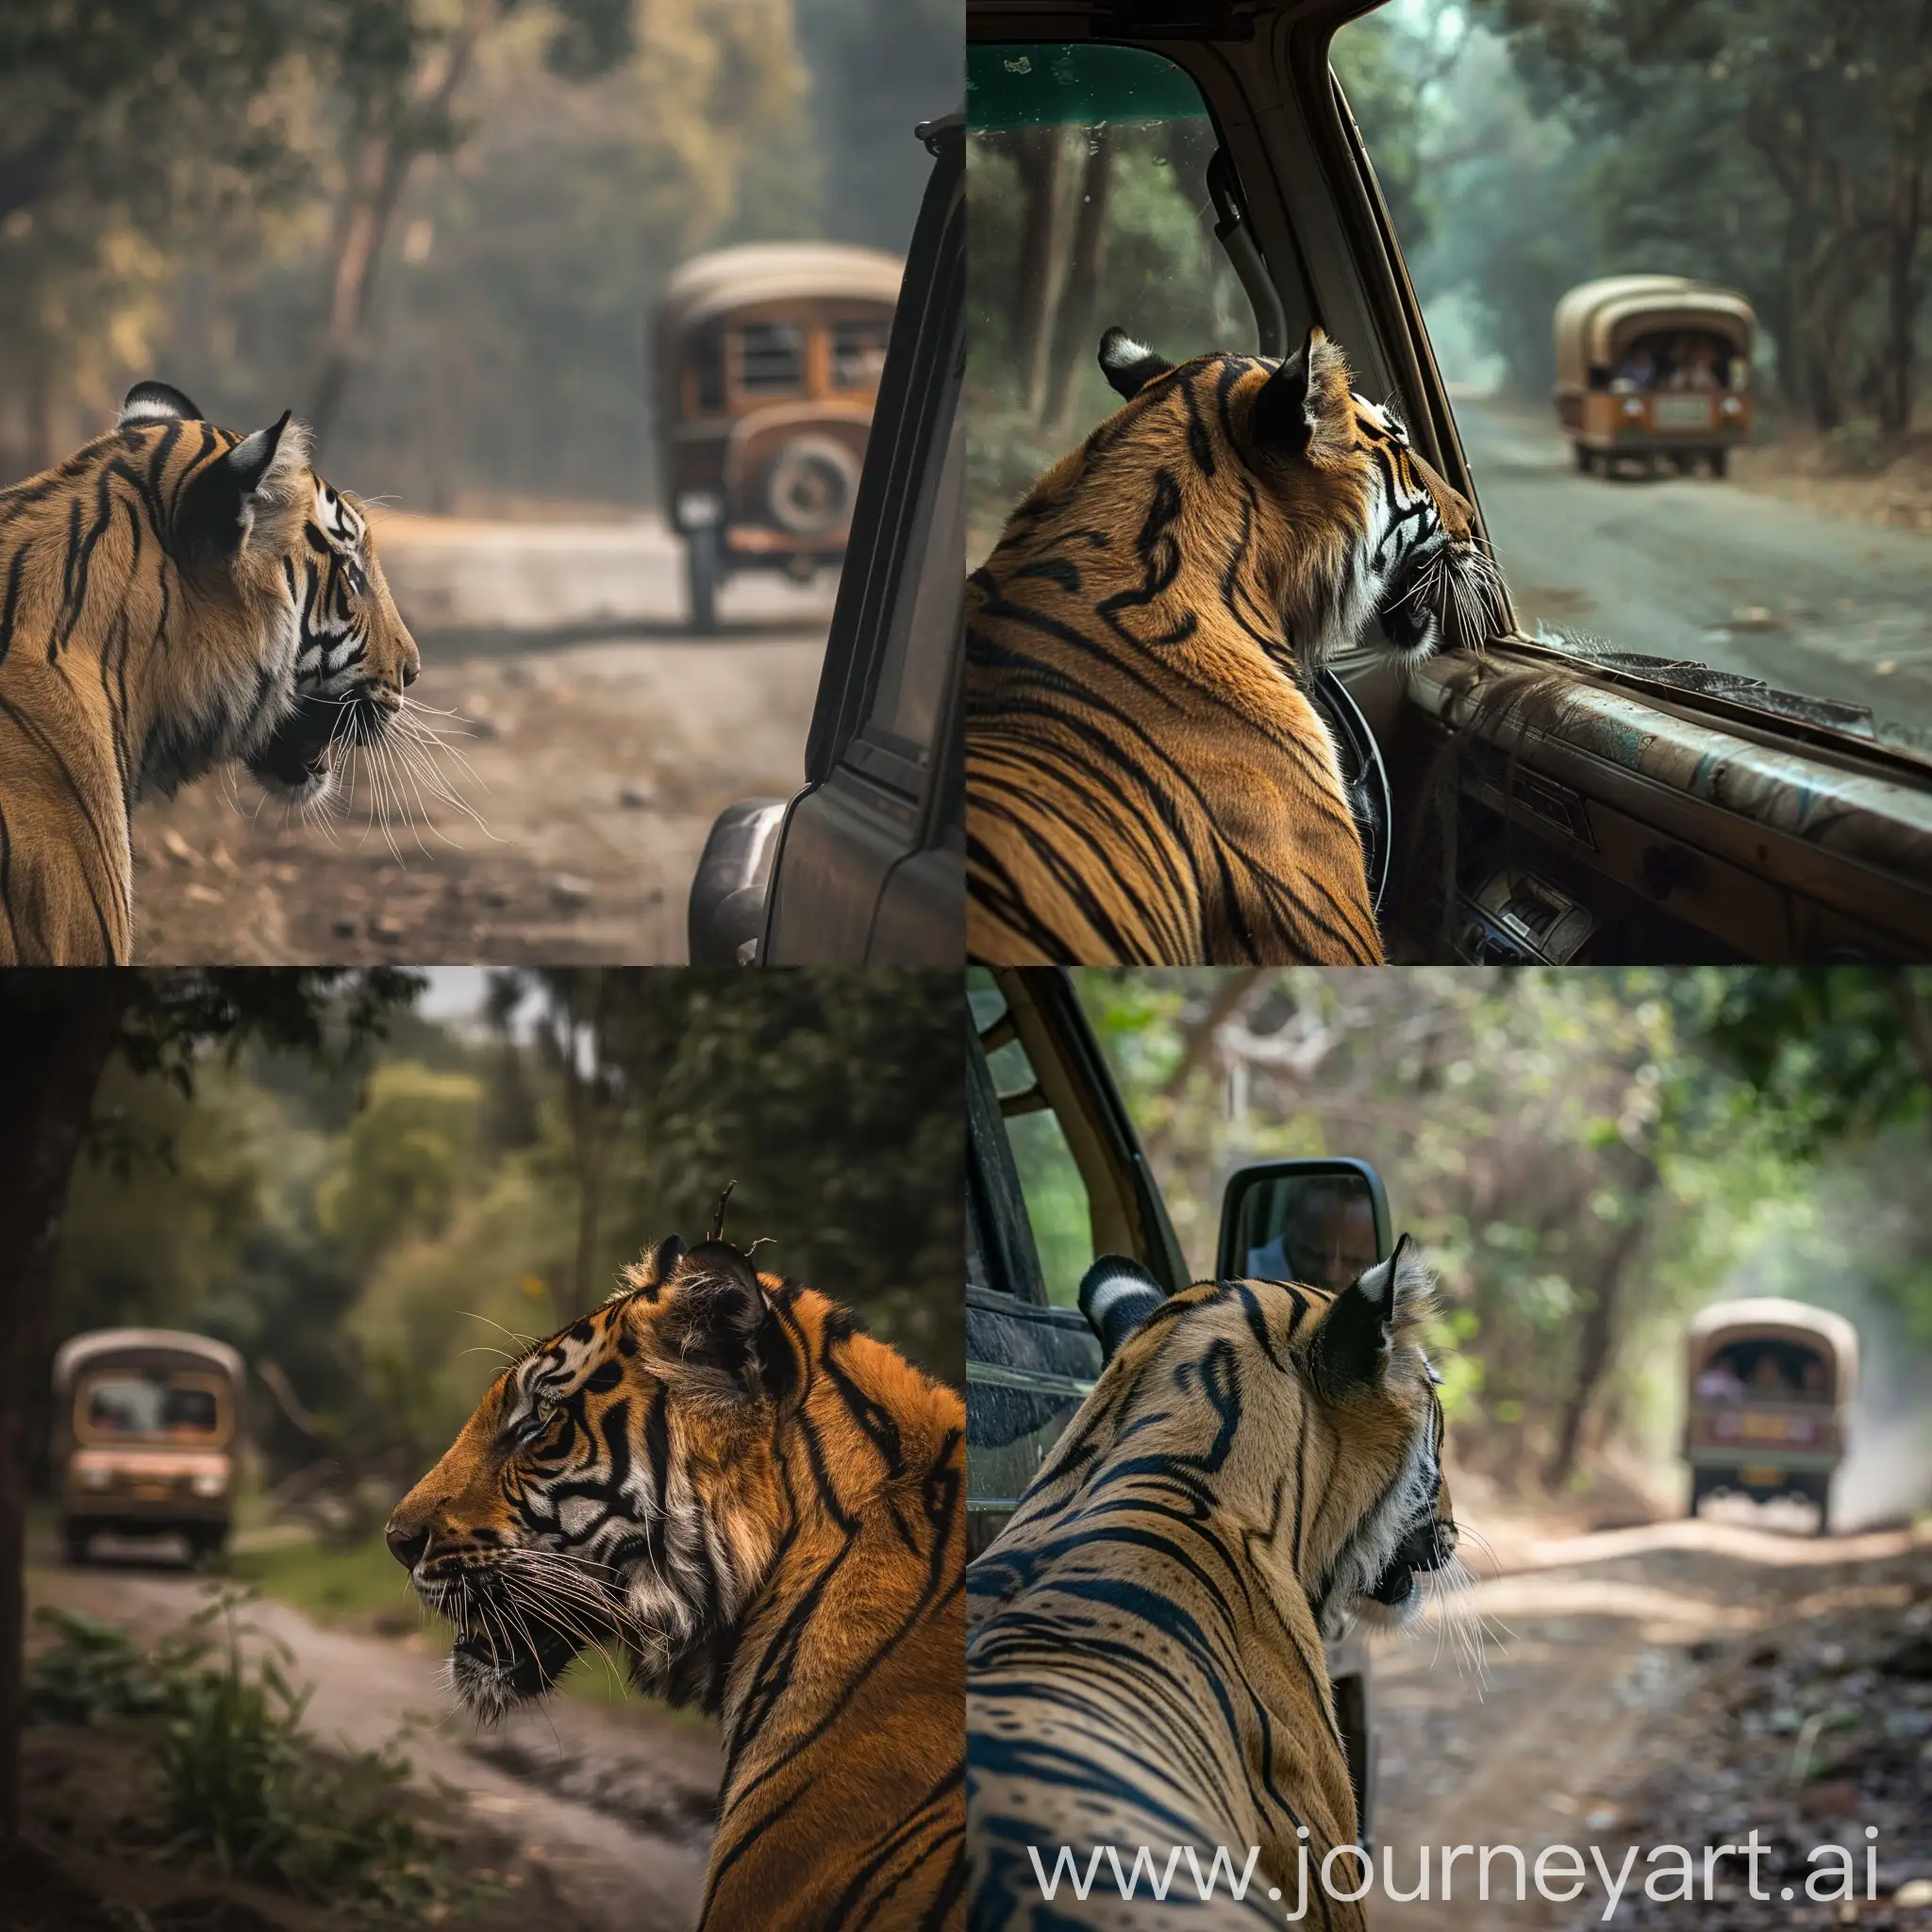 tiger looking at a gypsy car coming from a turn and heads to the jungle